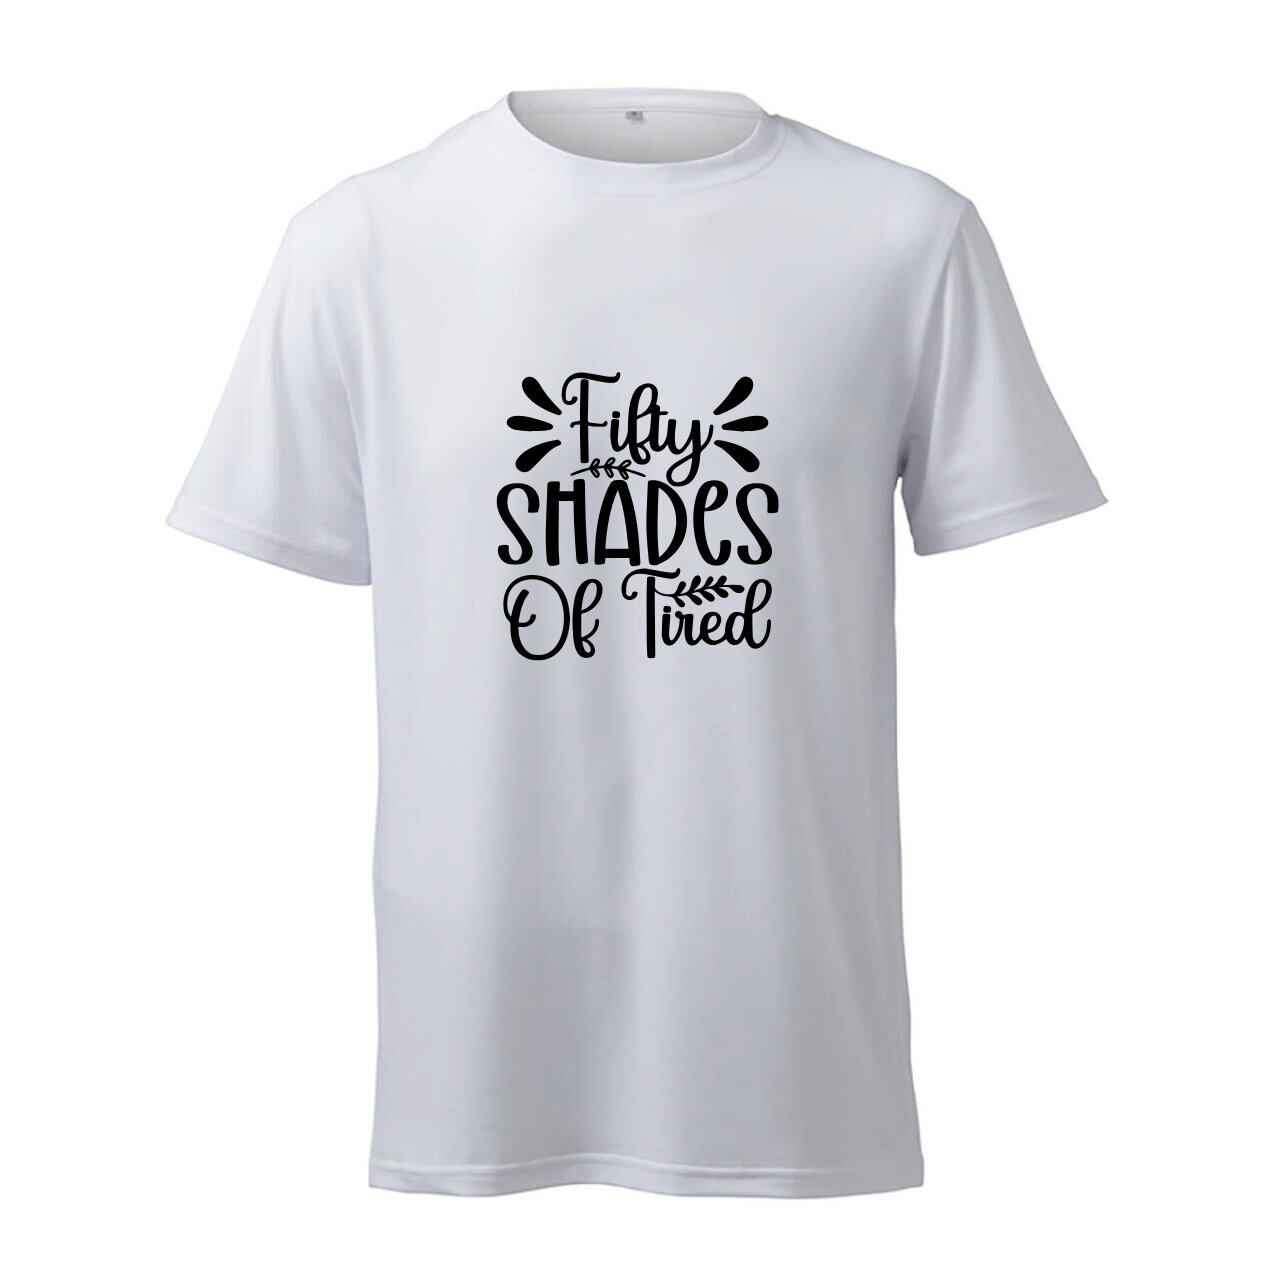 Fifty Shades of Tired - T-Shirt